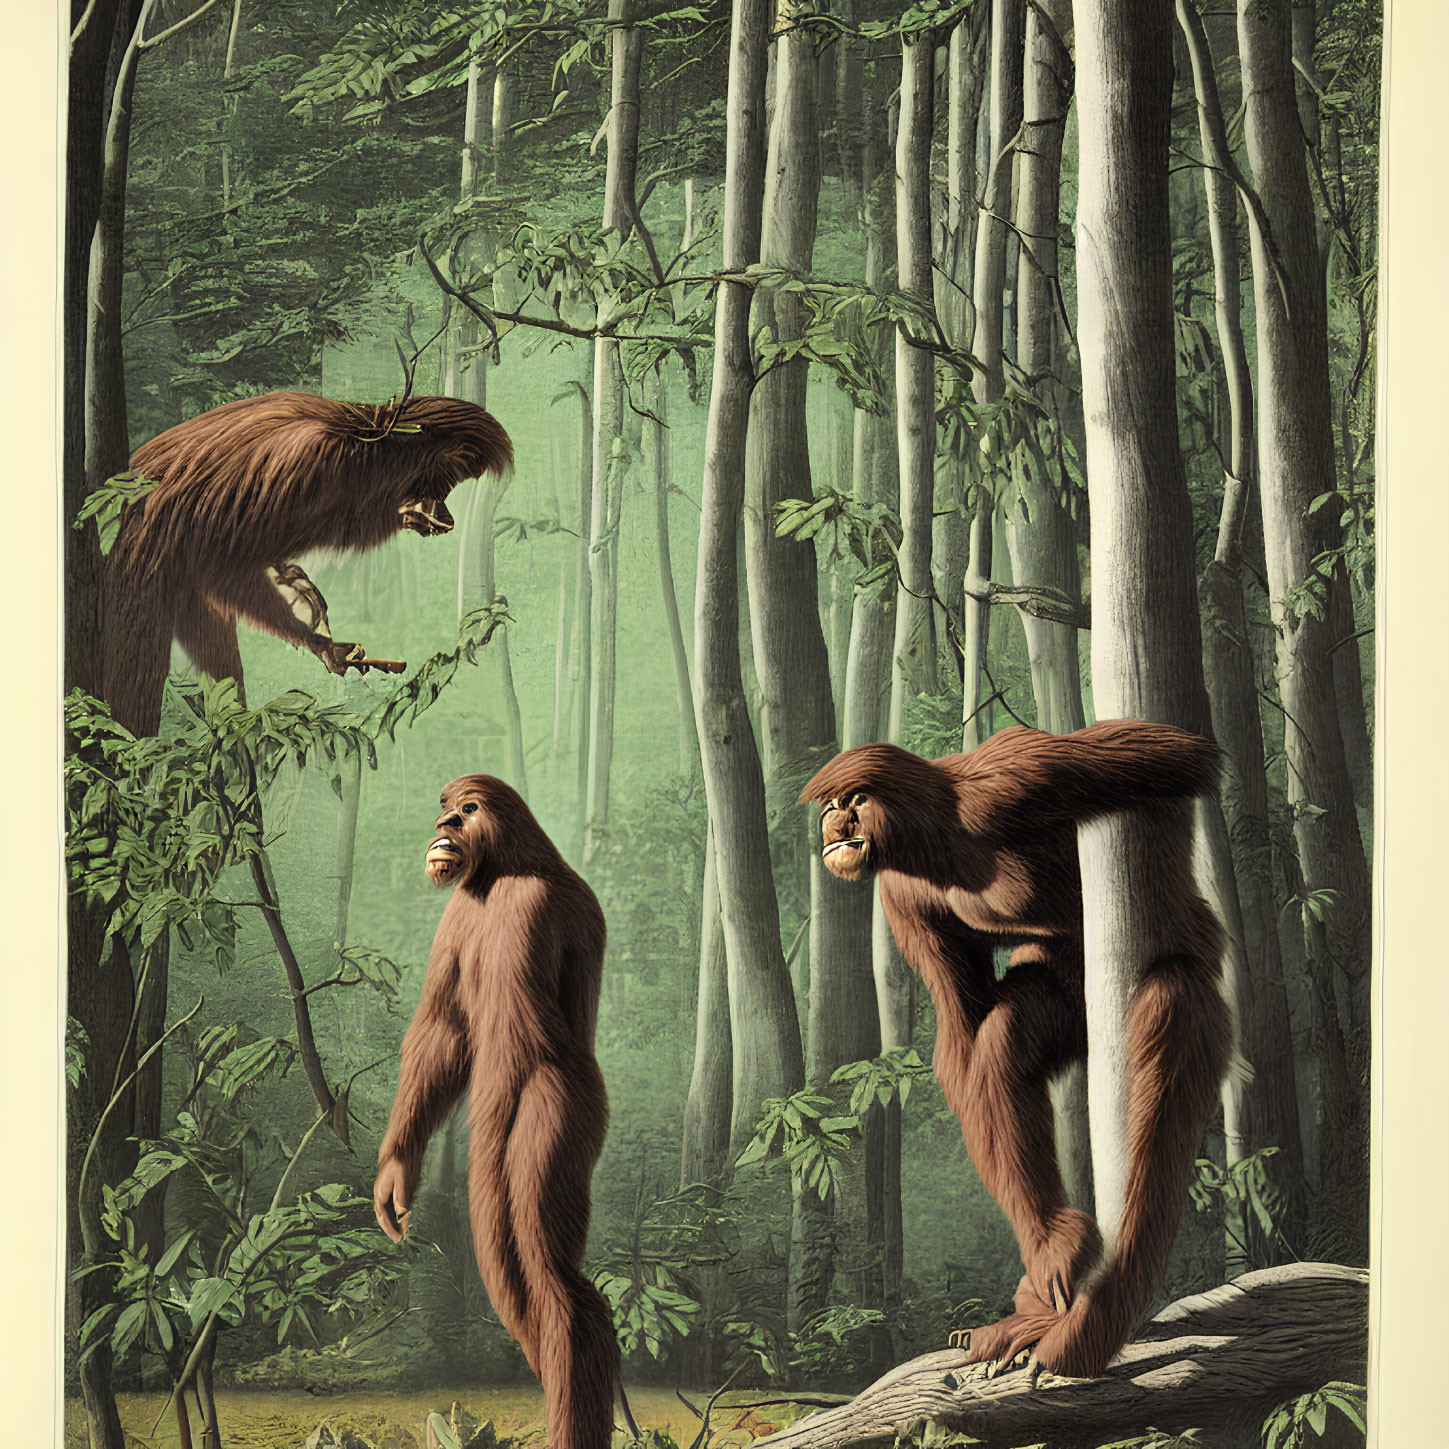 Three Large Ape-like Creatures in Forest Scene